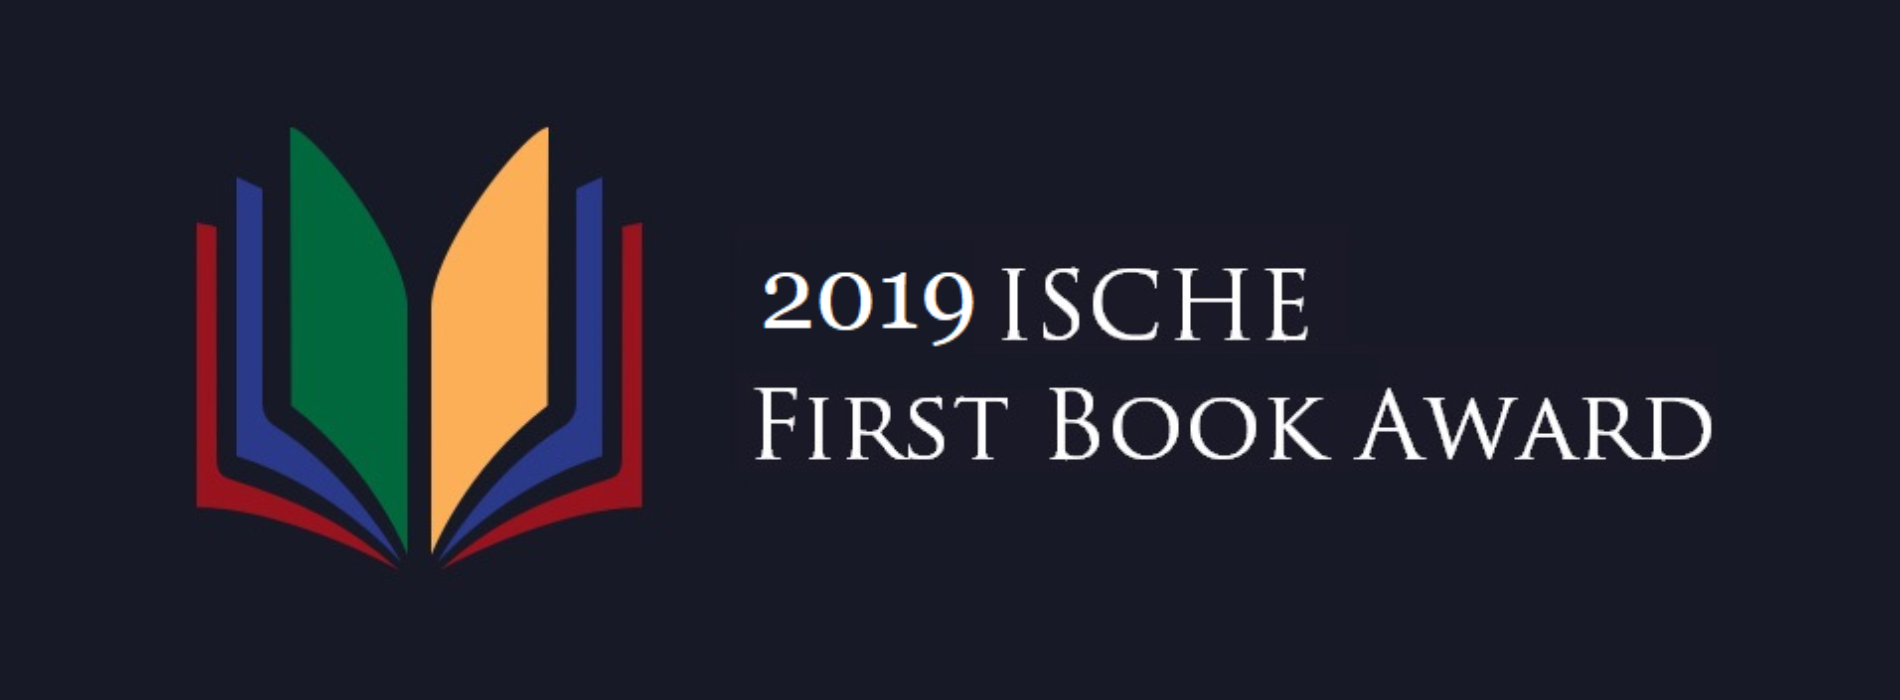 Request for submissions: 2019 ISCHE First Book Award (Deadline: Sep. 28 2018)